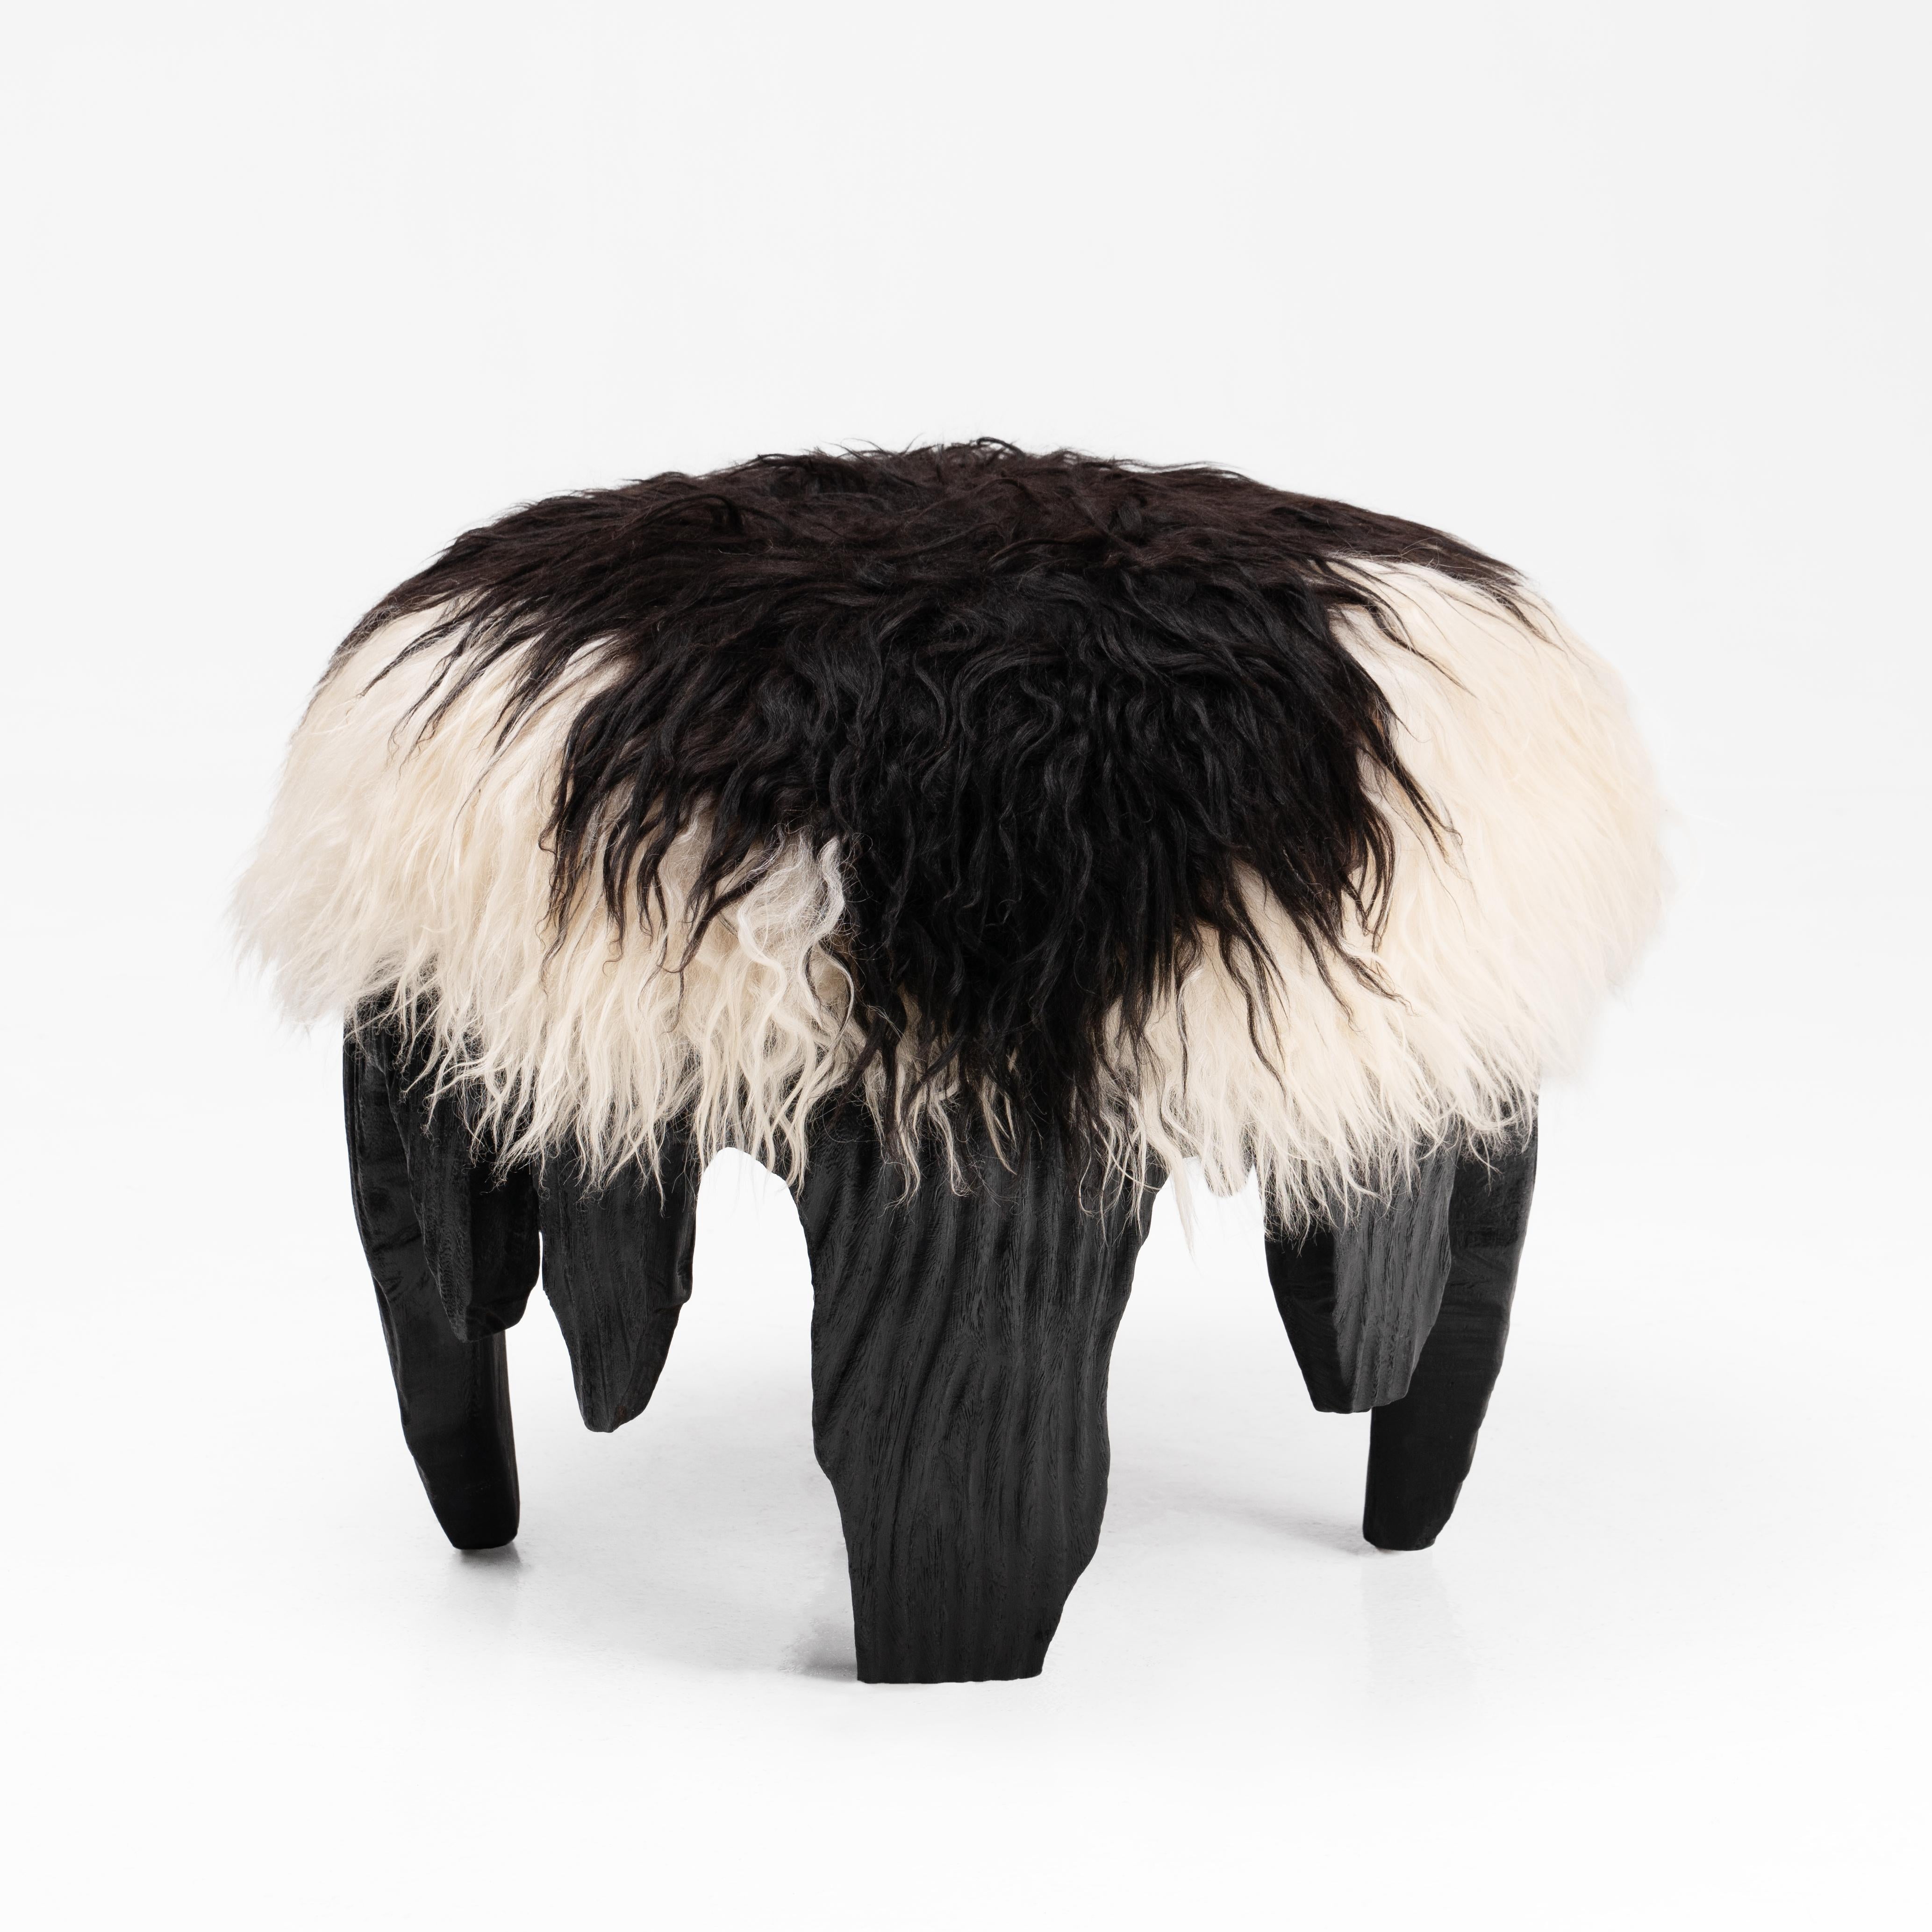 El Topo Ottoman by Odditi
Dimensions: ⌀ 60 x H 40 cm
Materials: Acacia Base, Sheepskin

A tactile piece of domestic fantasy, the El Topo ottoman is a social object, featuring a carved Acacia base, burnt using the traditional method of Shou Sugi Ban